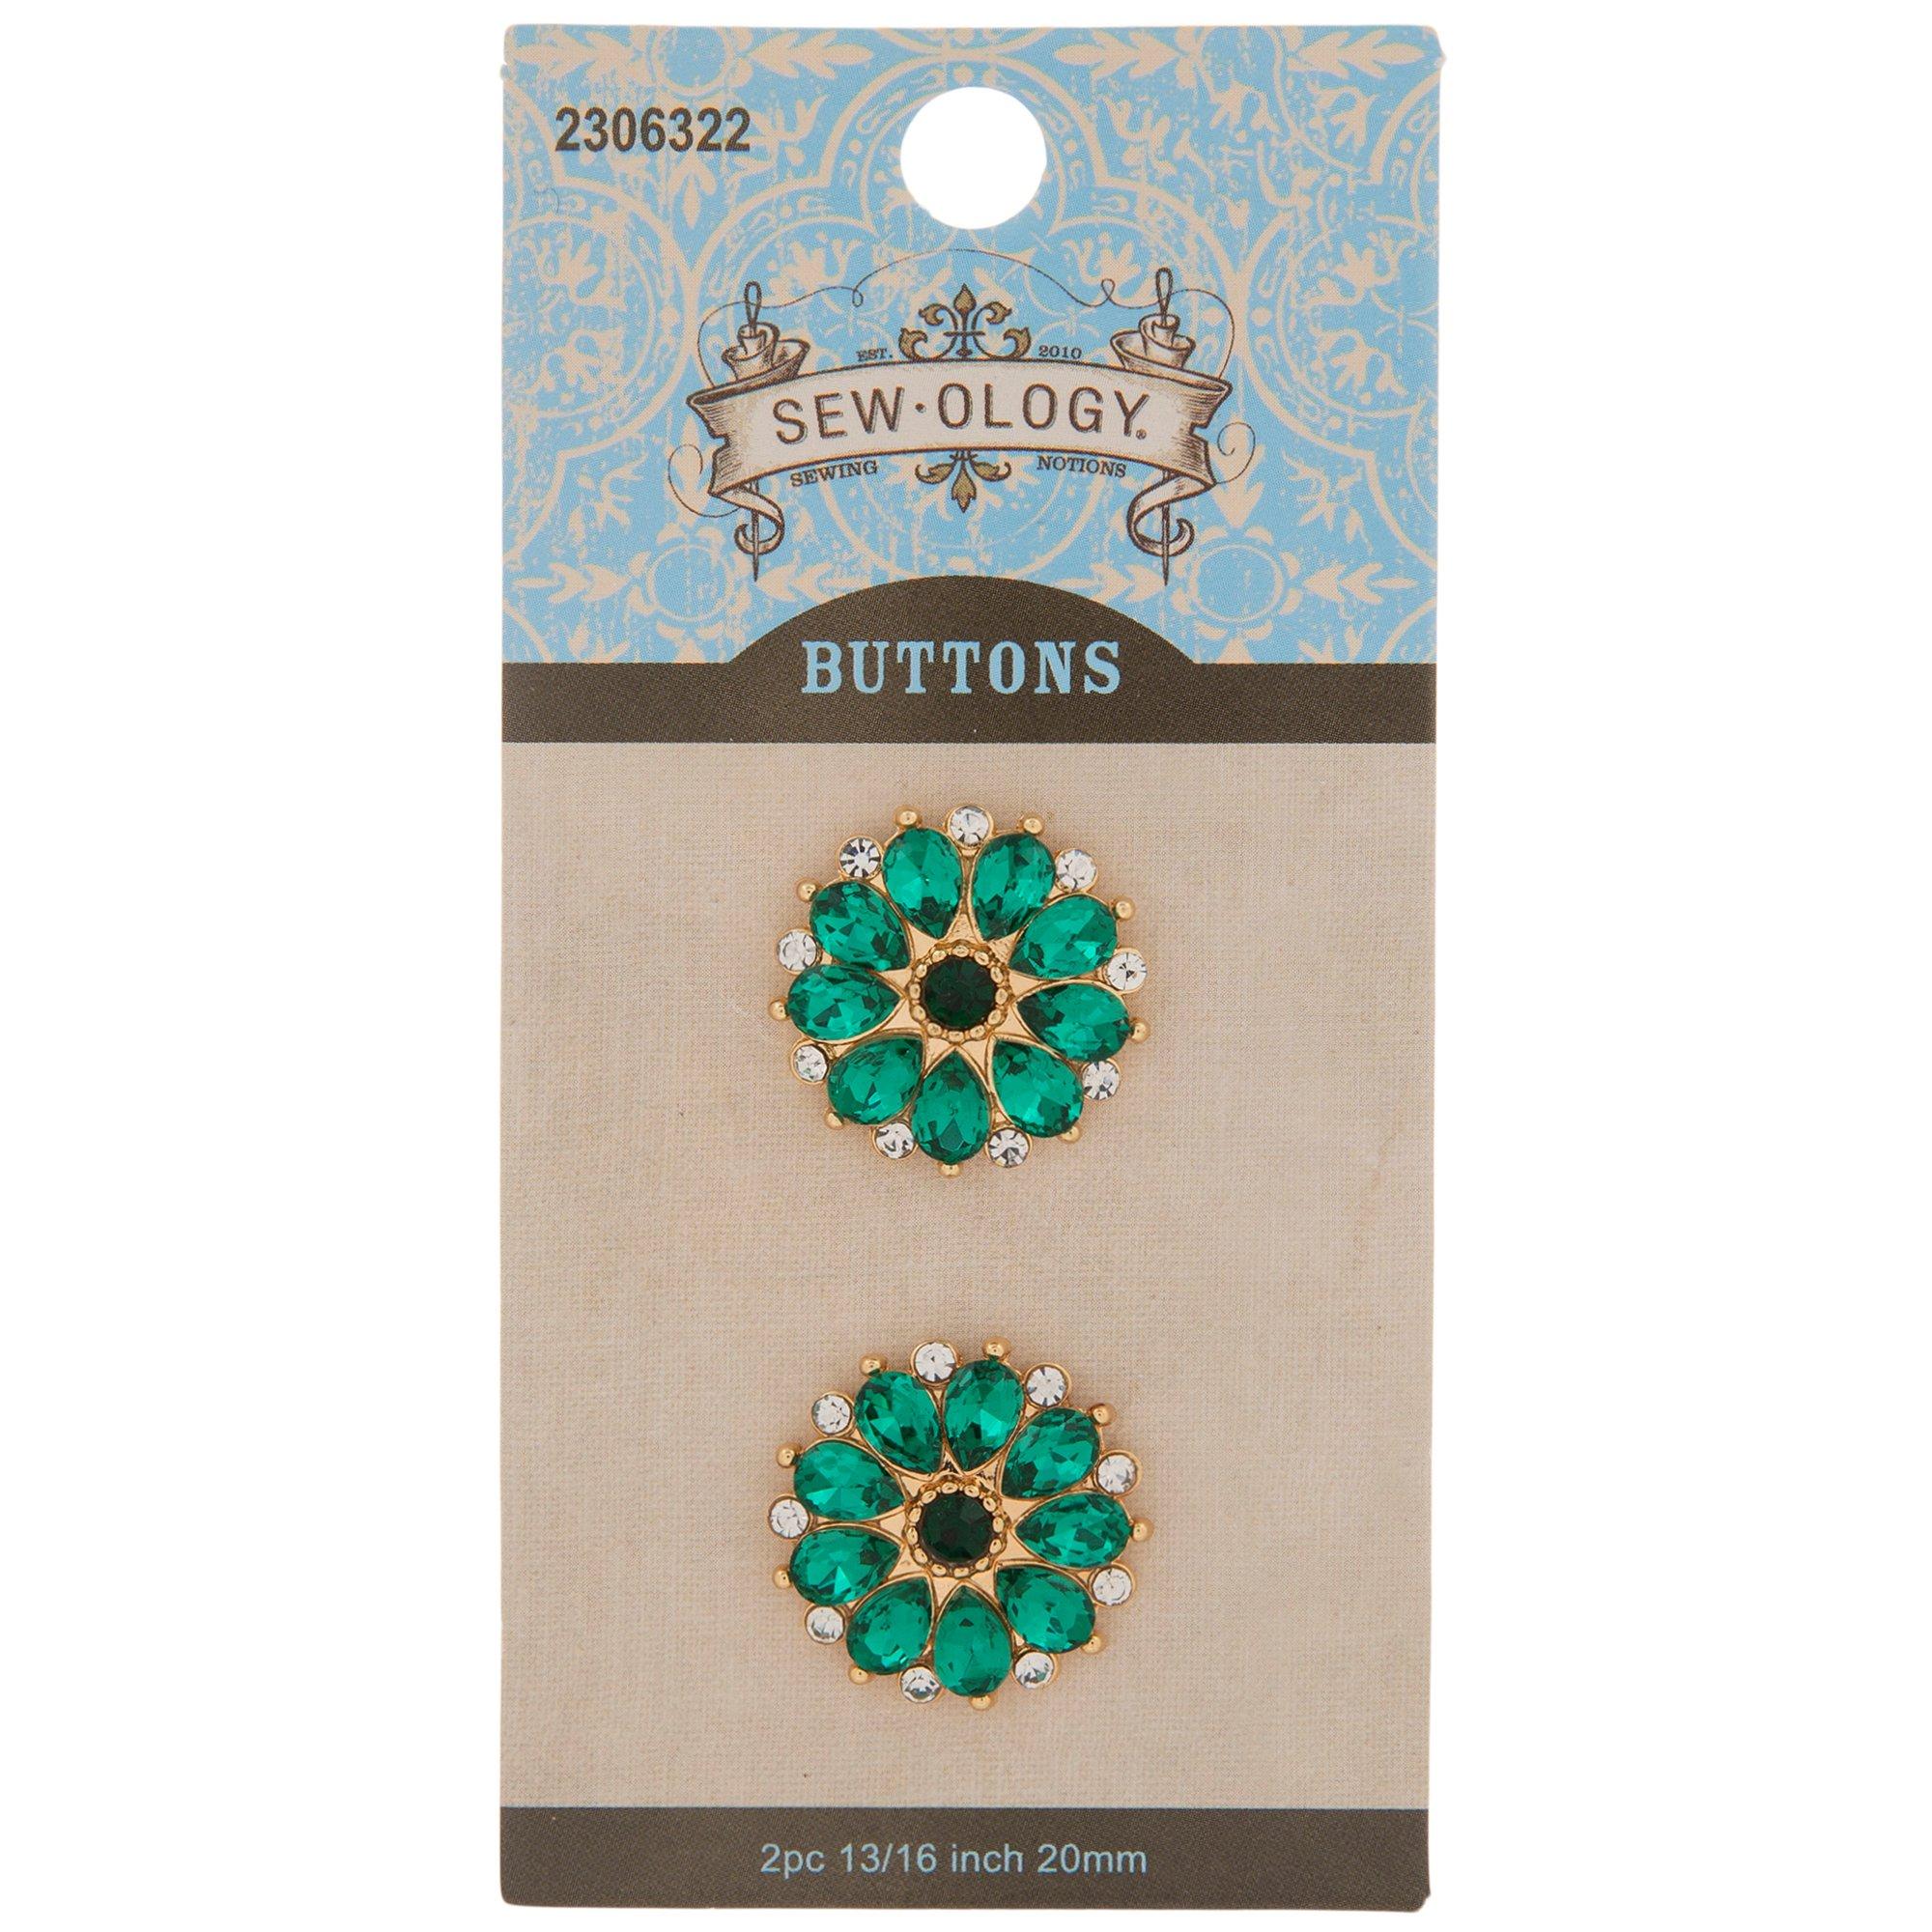 3 Sew-ology Decorative Rhinestone Sewing Buttons, New on Original Cards,  Two 15/16 Inch 513523 & One 1 1/2 1096221 Silver in Color 